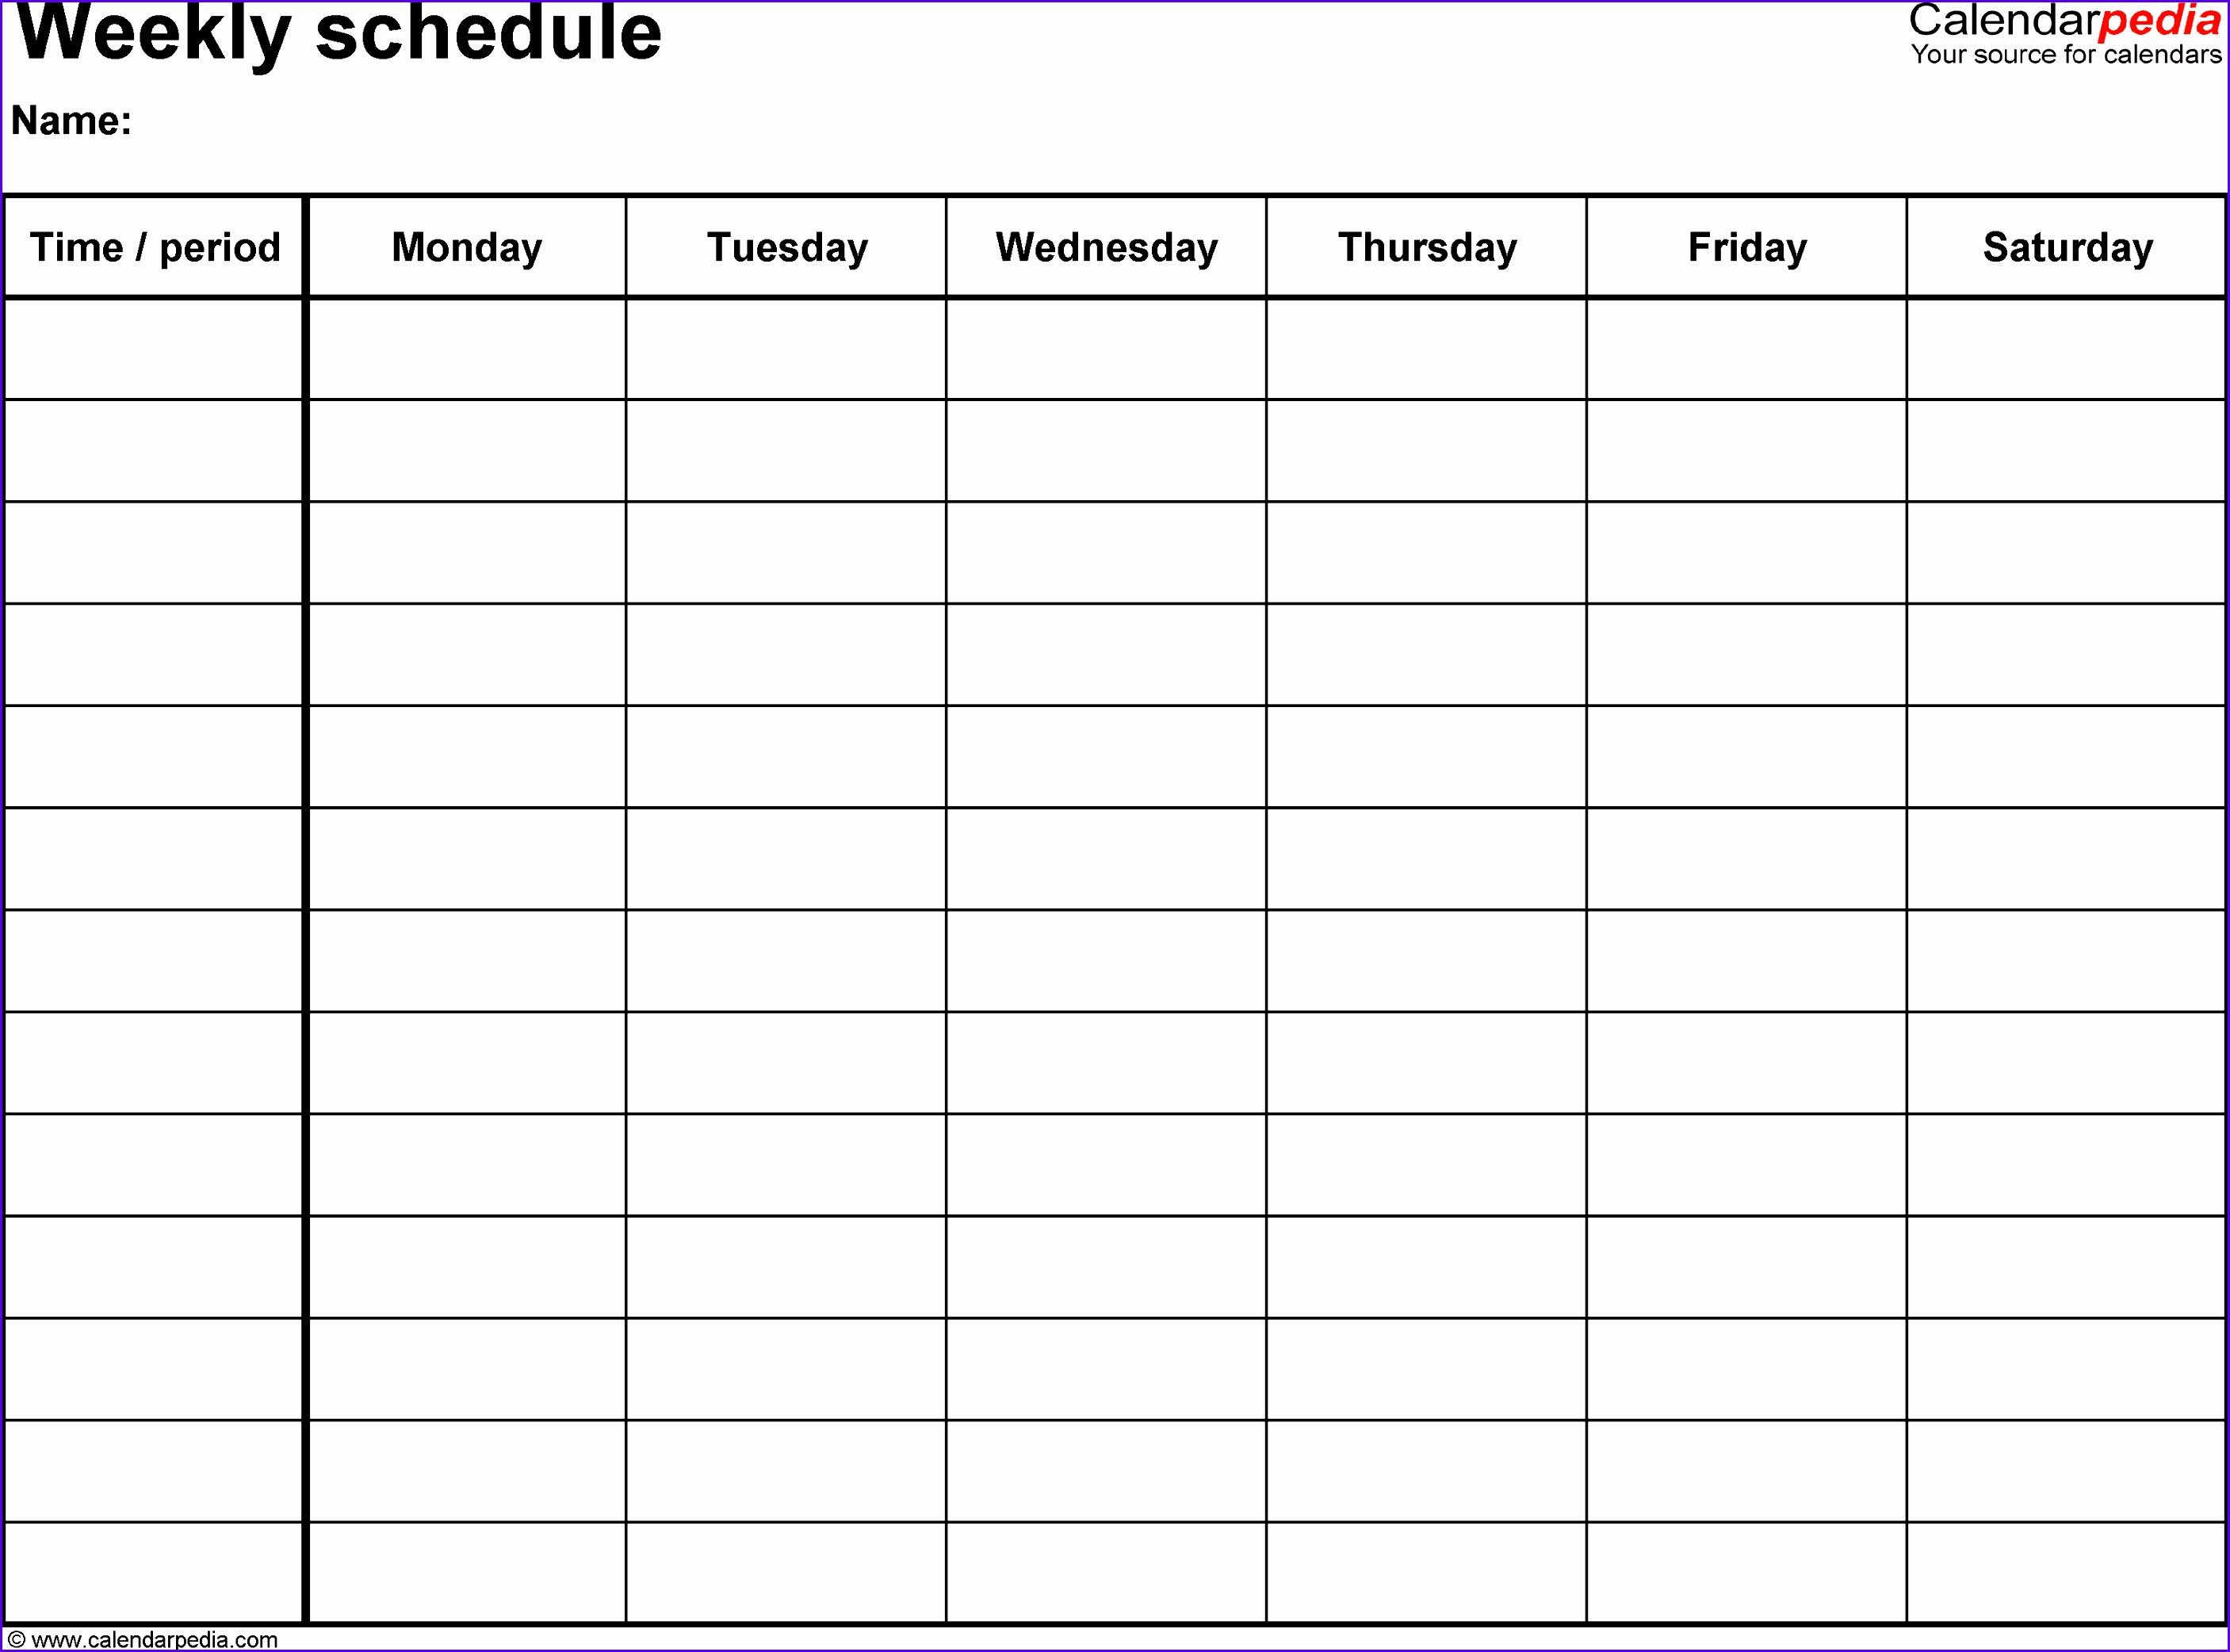 Weekly schedule template for Excel version 8 landscape 1 page Monday to Saturday 28132084